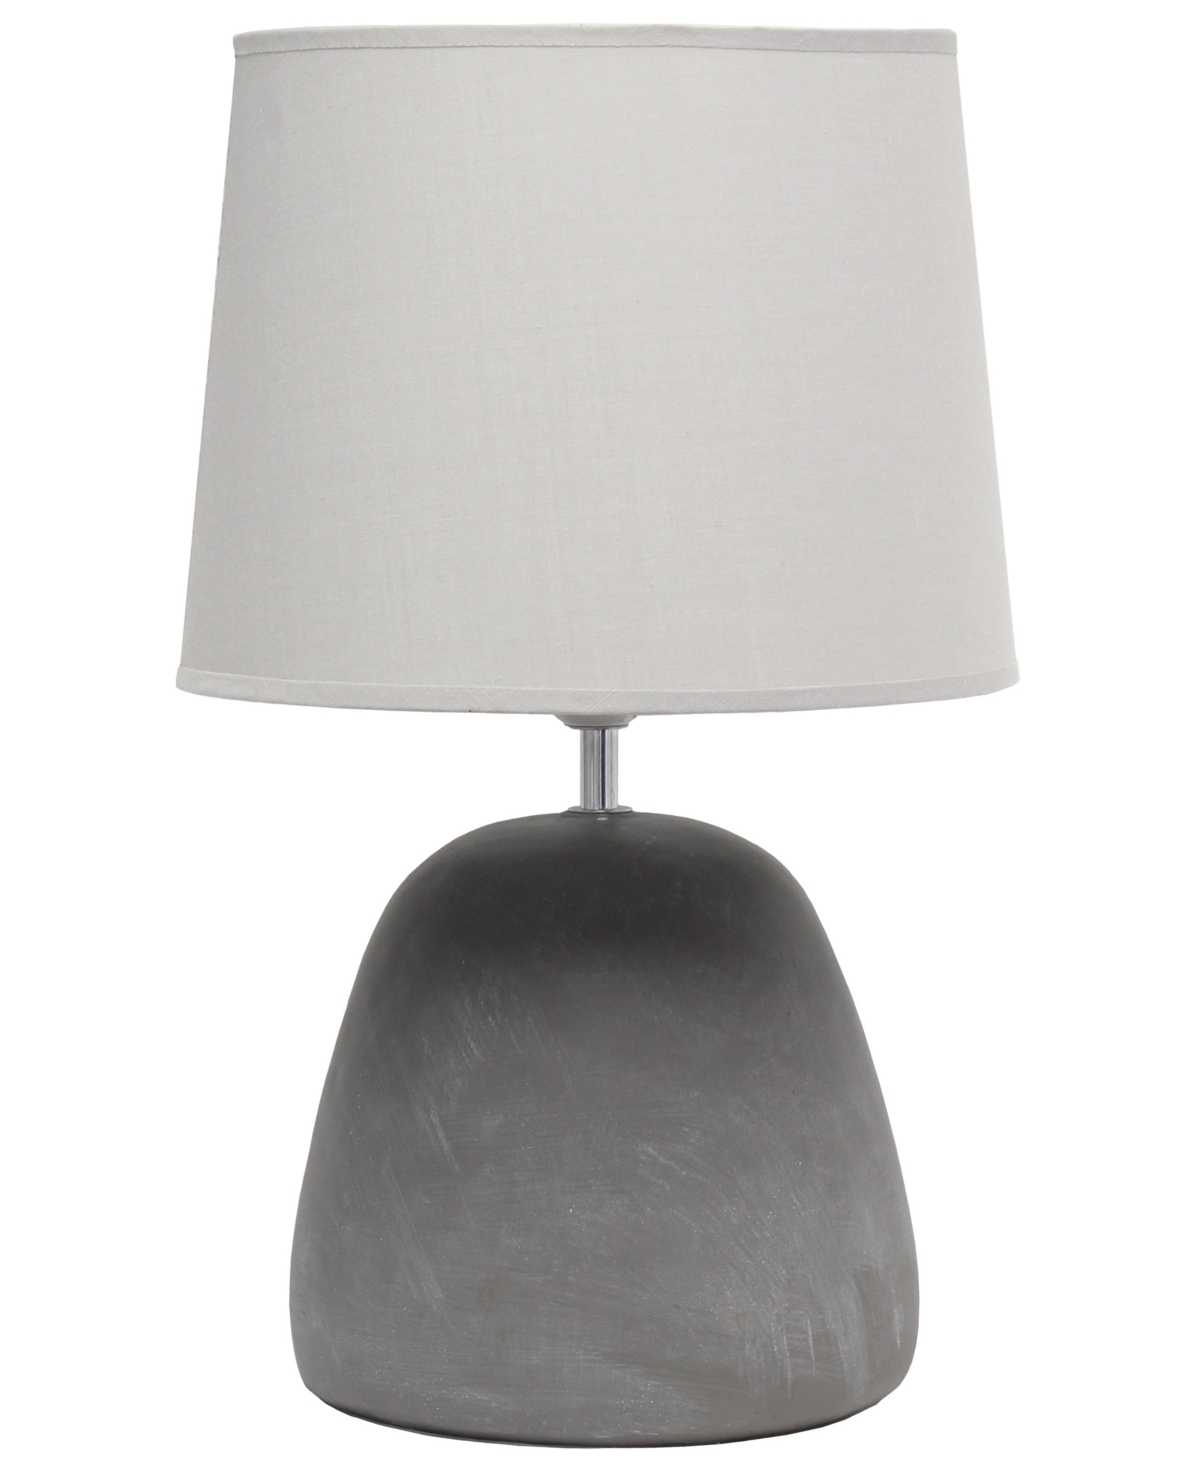 Simple Designs Round Concrete Table Lamp In Gray